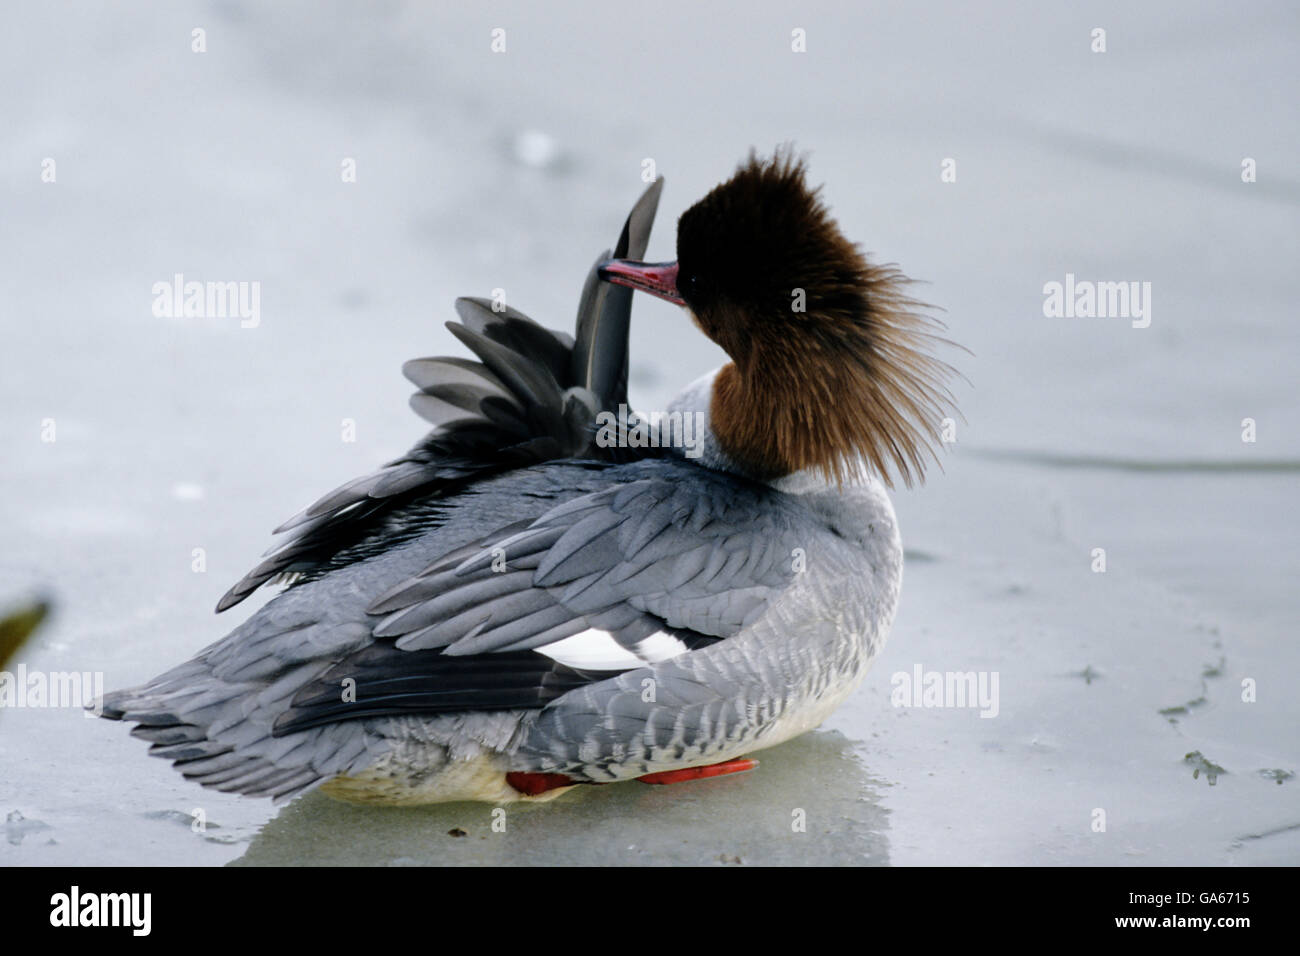 Adult female Goosander (Mergus merganser) preening its feathers at a frozen lake - Ammersee, Bavaria/Germany Stock Photo